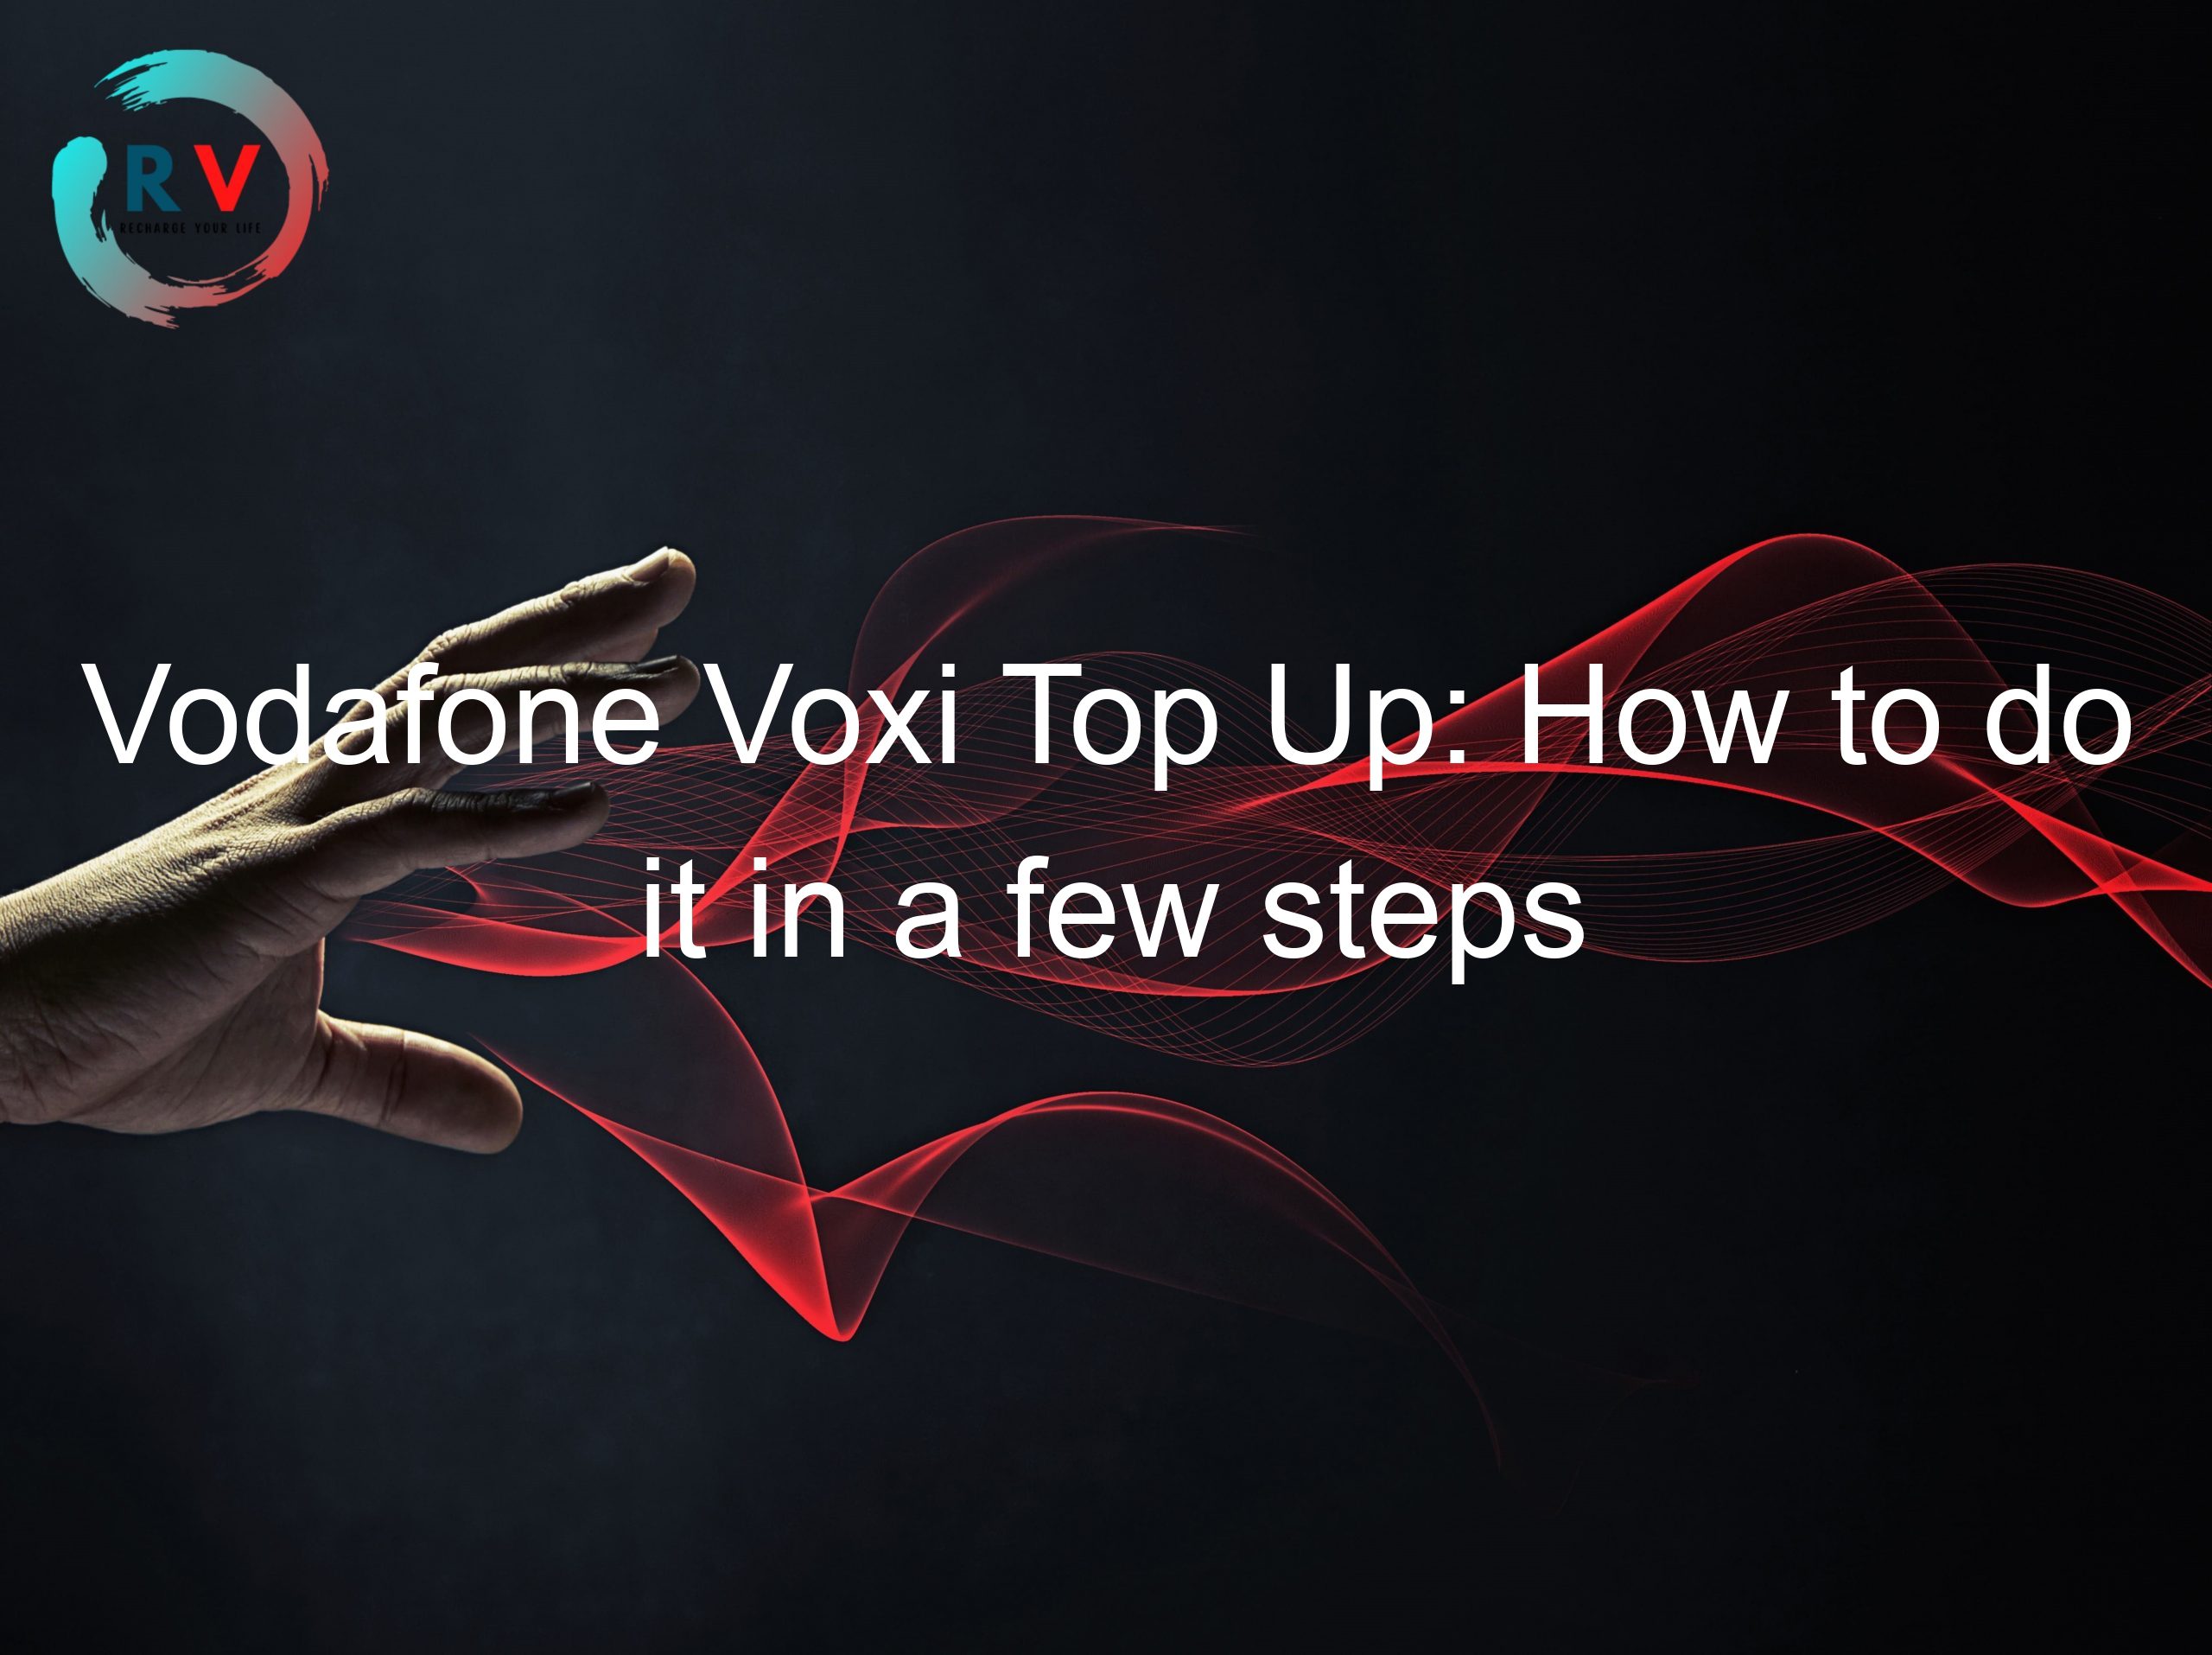 Vodafone Voxi Top Up: How to do it in a few steps